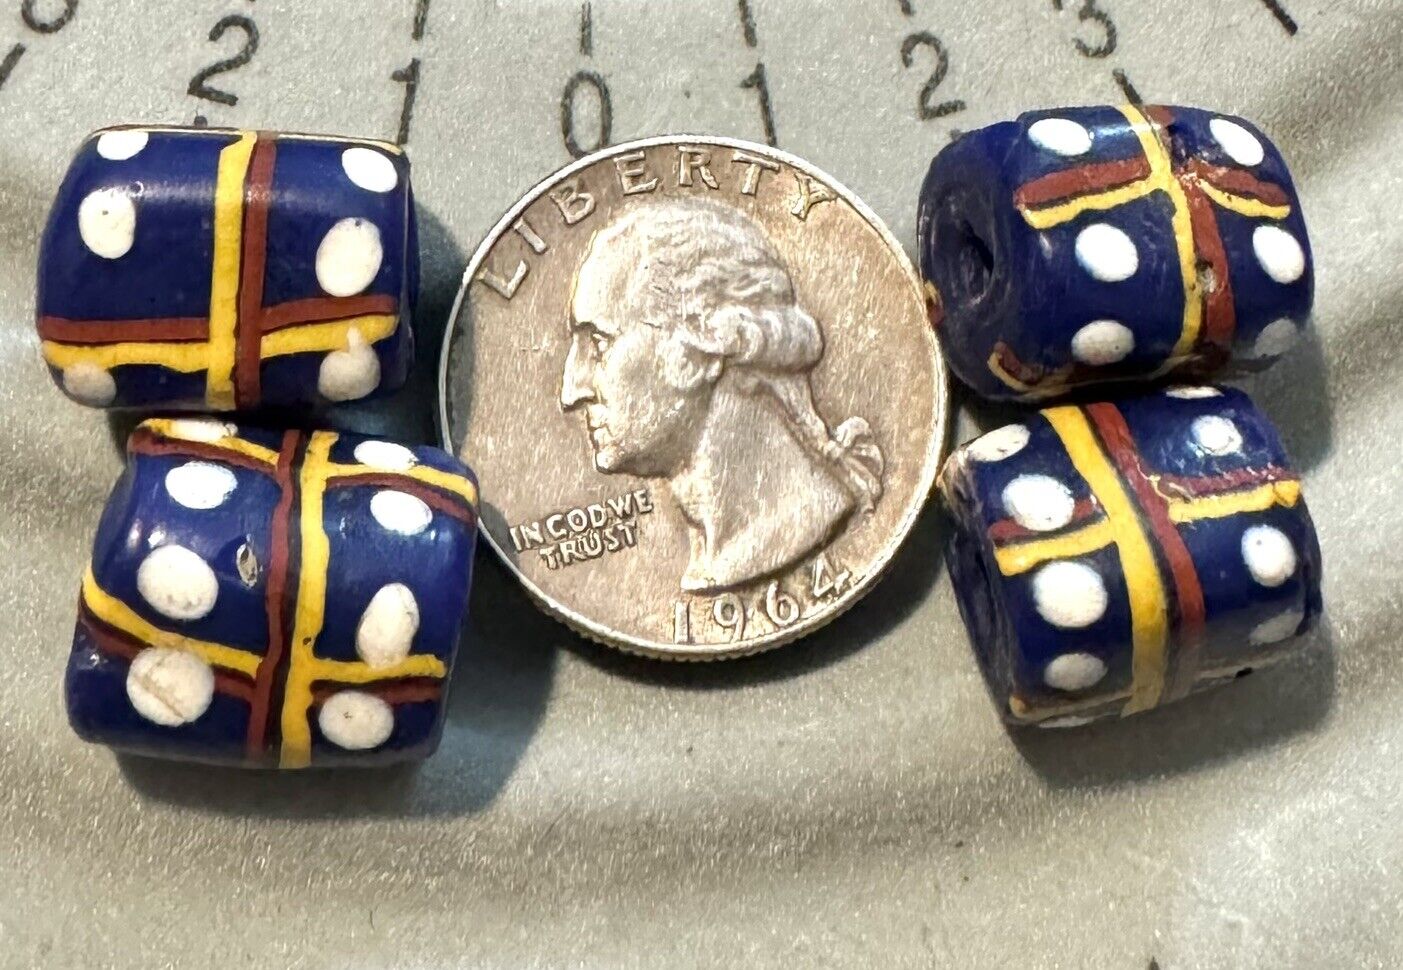 4 RARE MATCHING VENETIAN “GIFT BOX” BEADS, Early 20th C  African Trade beads